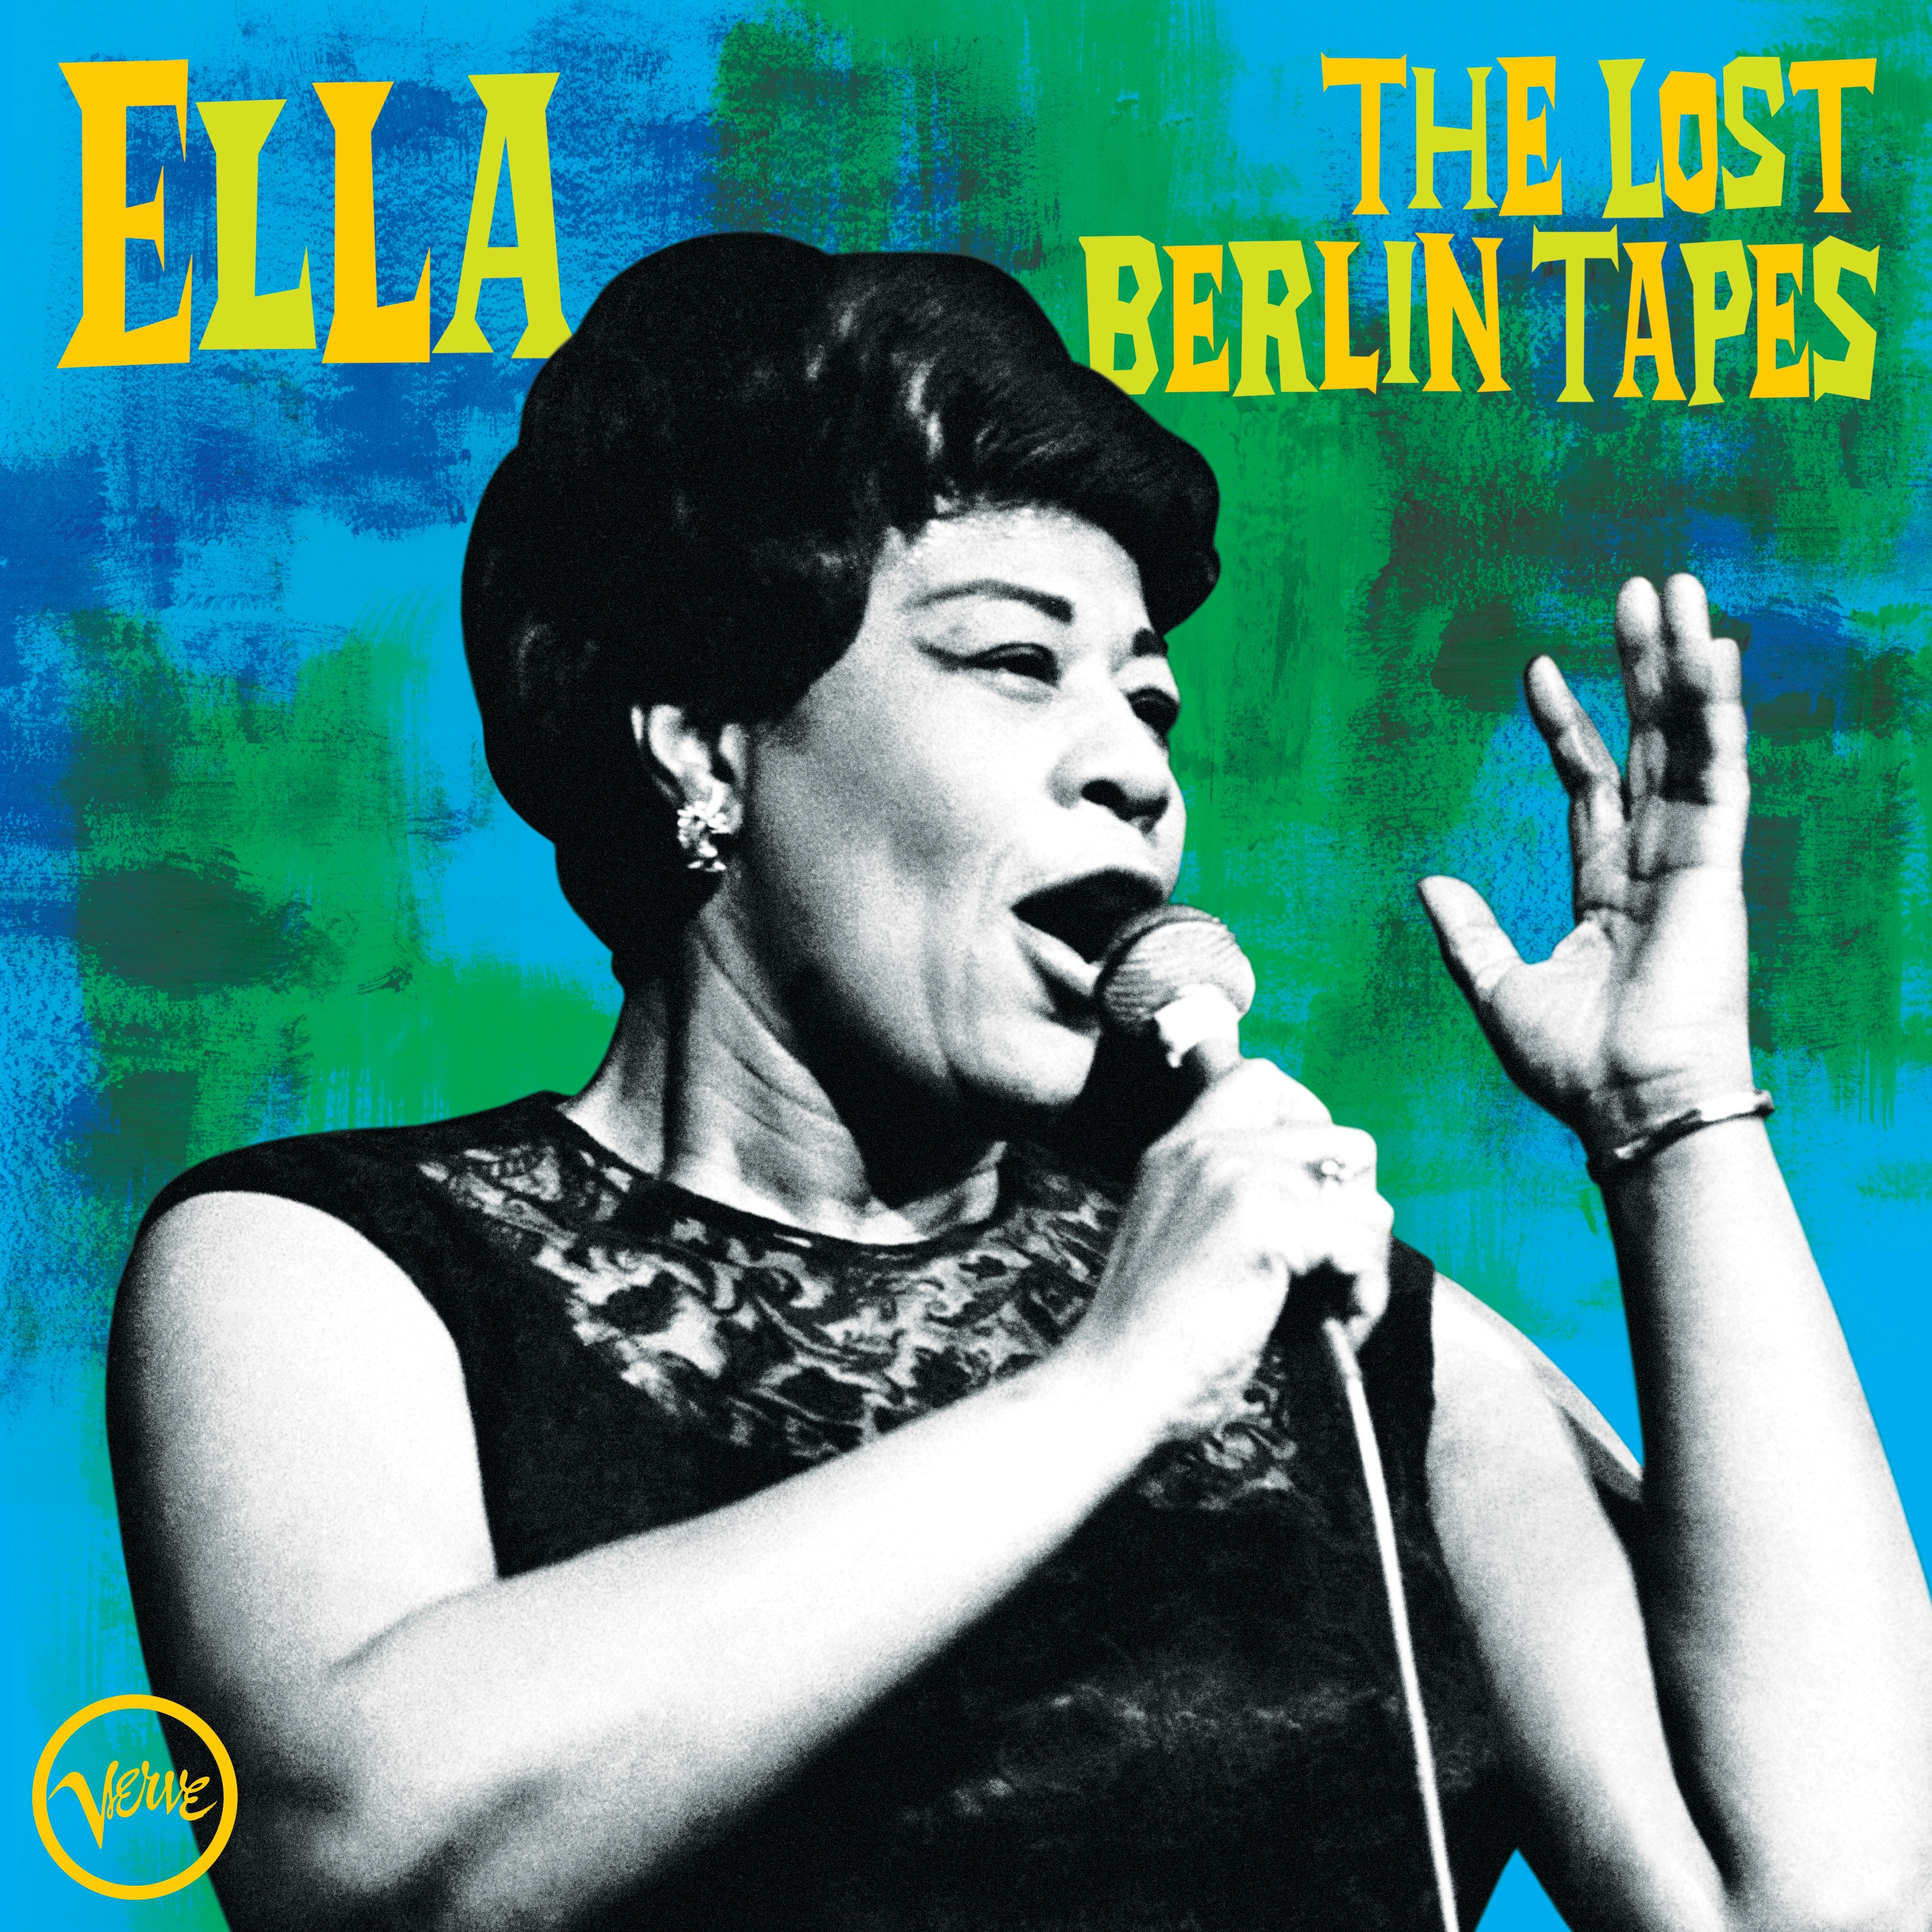 Album artwork for The Lost Berlin Tapes by Ella Fitzgerald